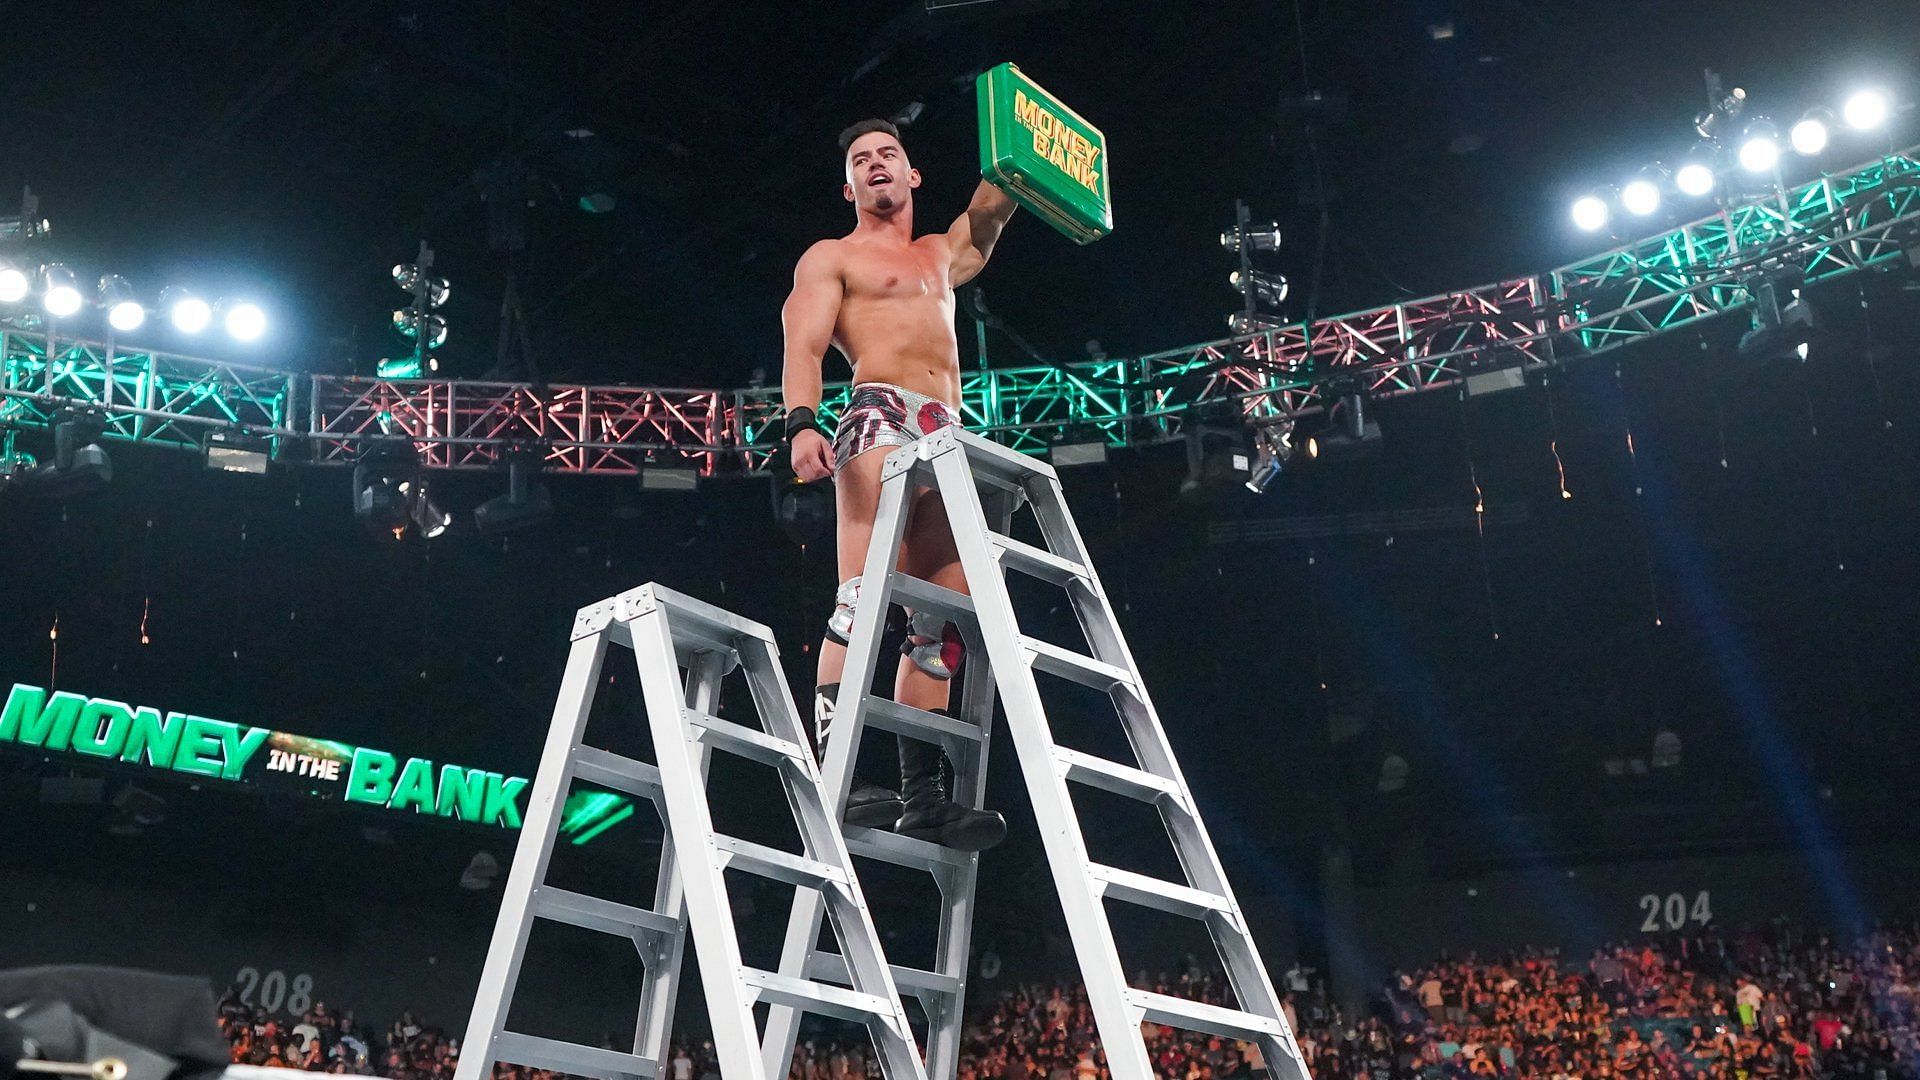 Theory is Mr. Money in the Bank